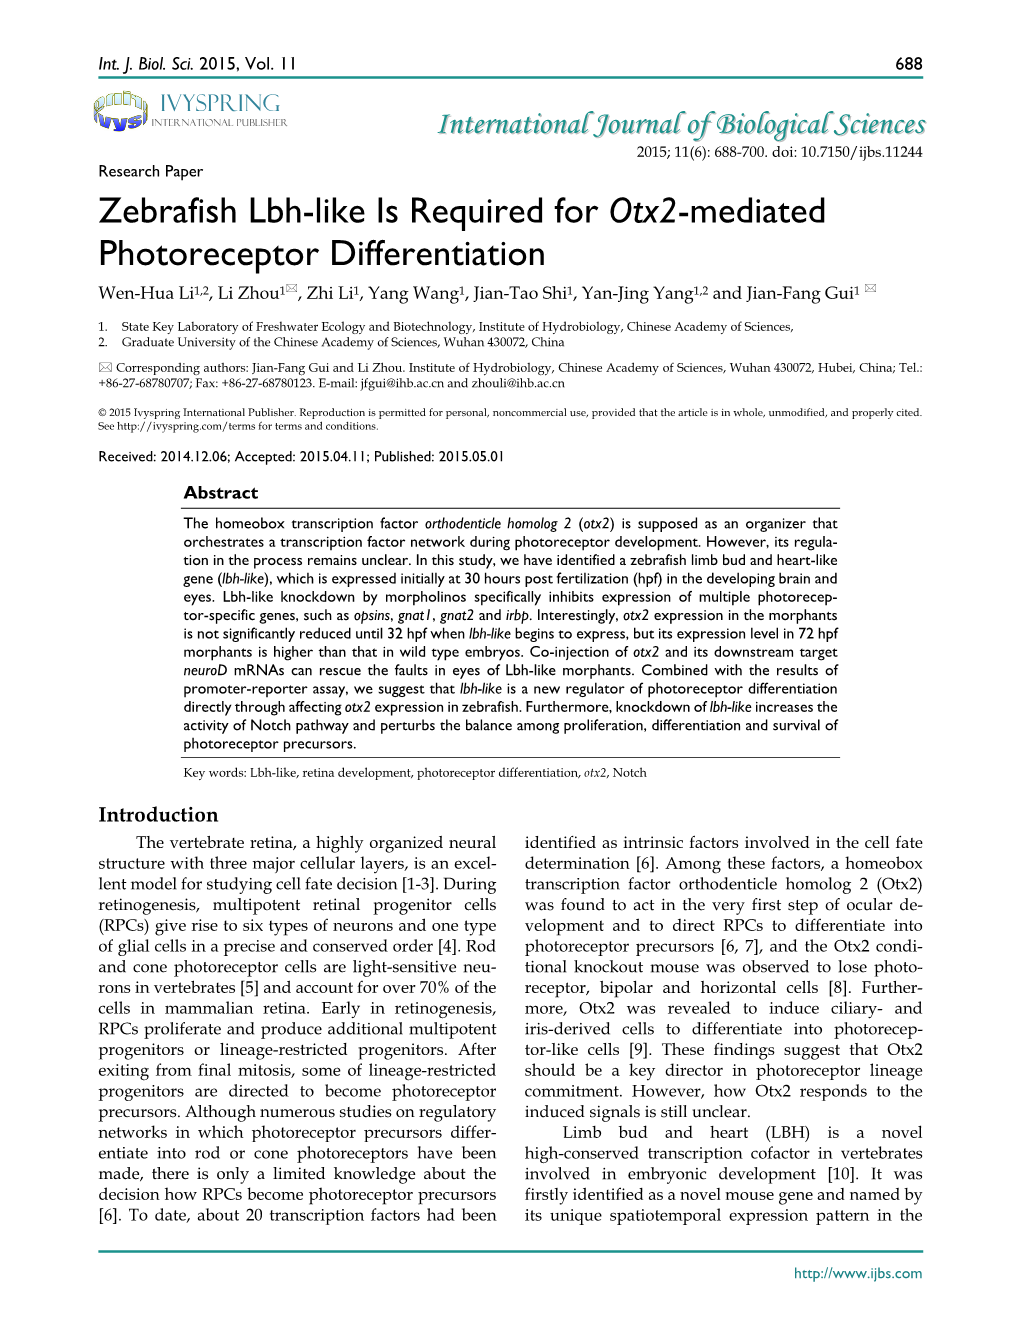 Zebrafish Lbh-Like Is Required for Otx2-Mediated Photoreceptor